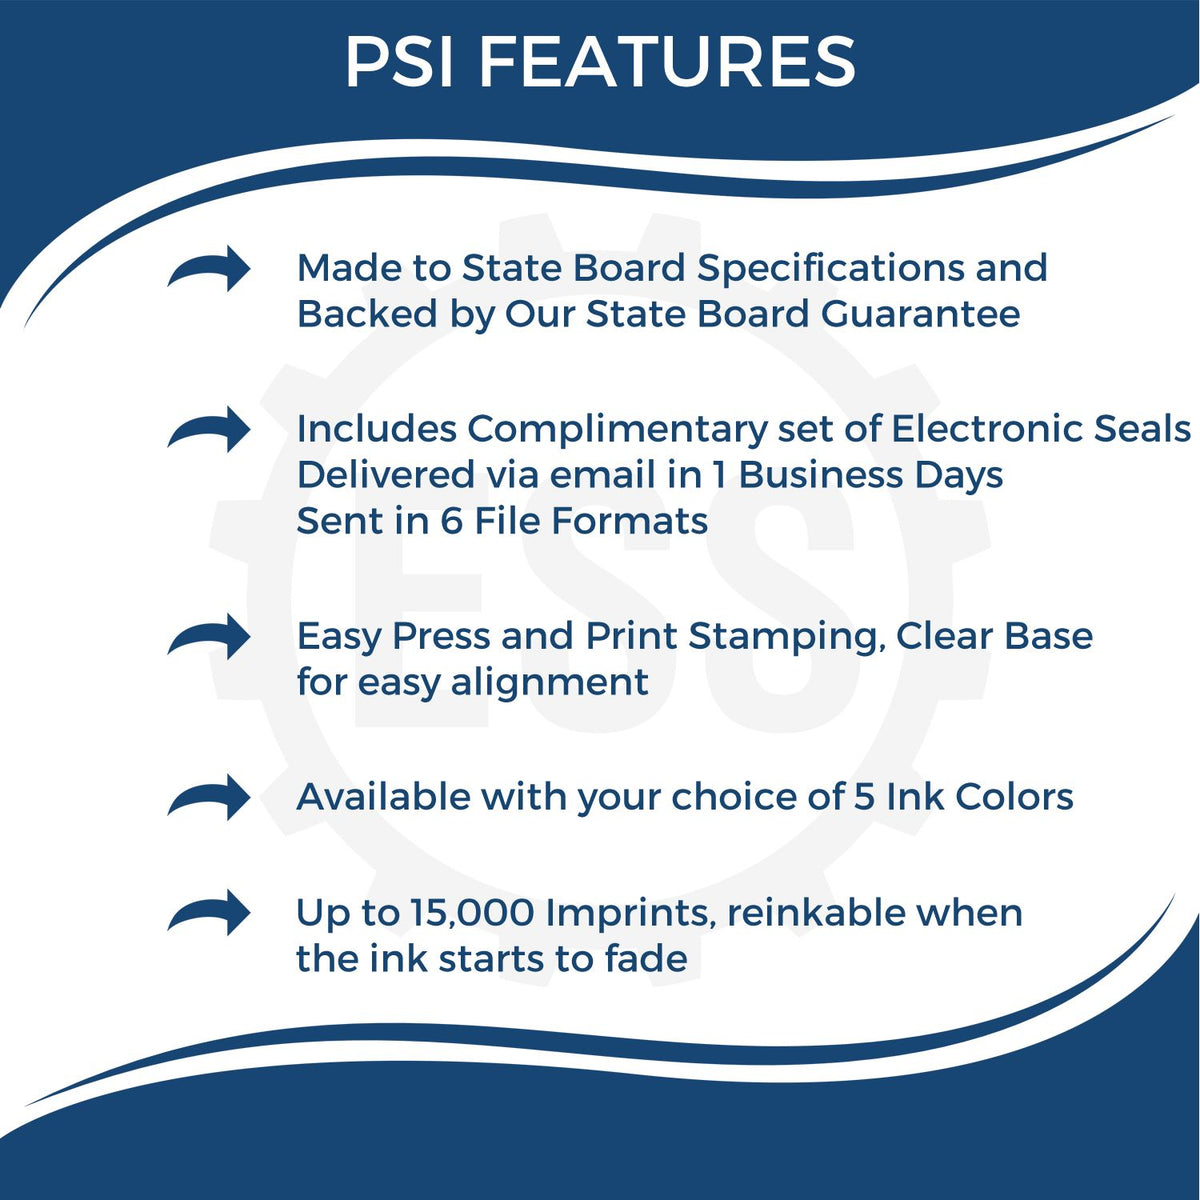 A picture of an infographic highlighting the selling points for the PSI Illinois Notary Stamp